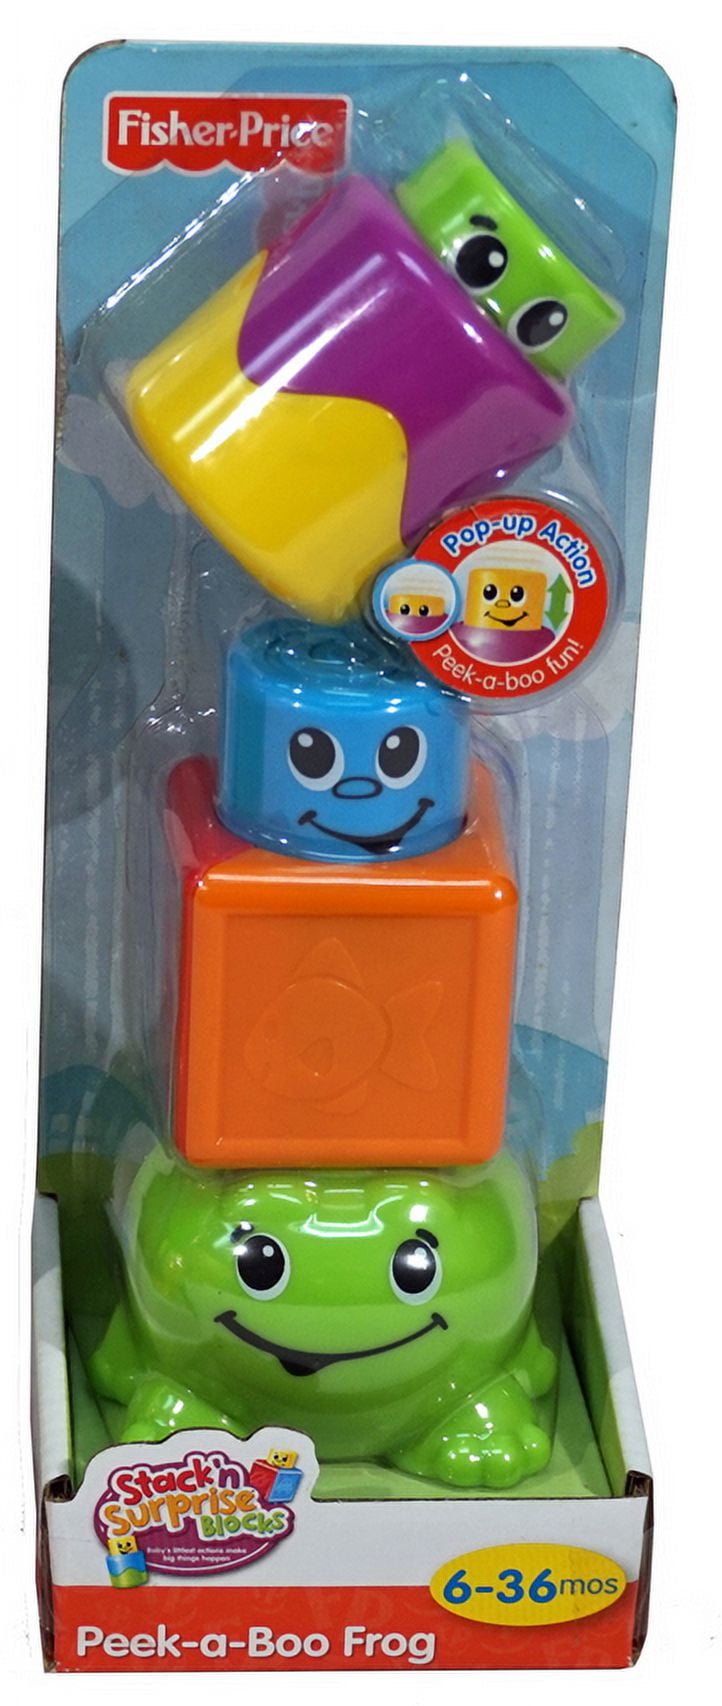 Fisher Price Stack 'n Surprise Blocks Peek-a-Boo Frog Baby Toy